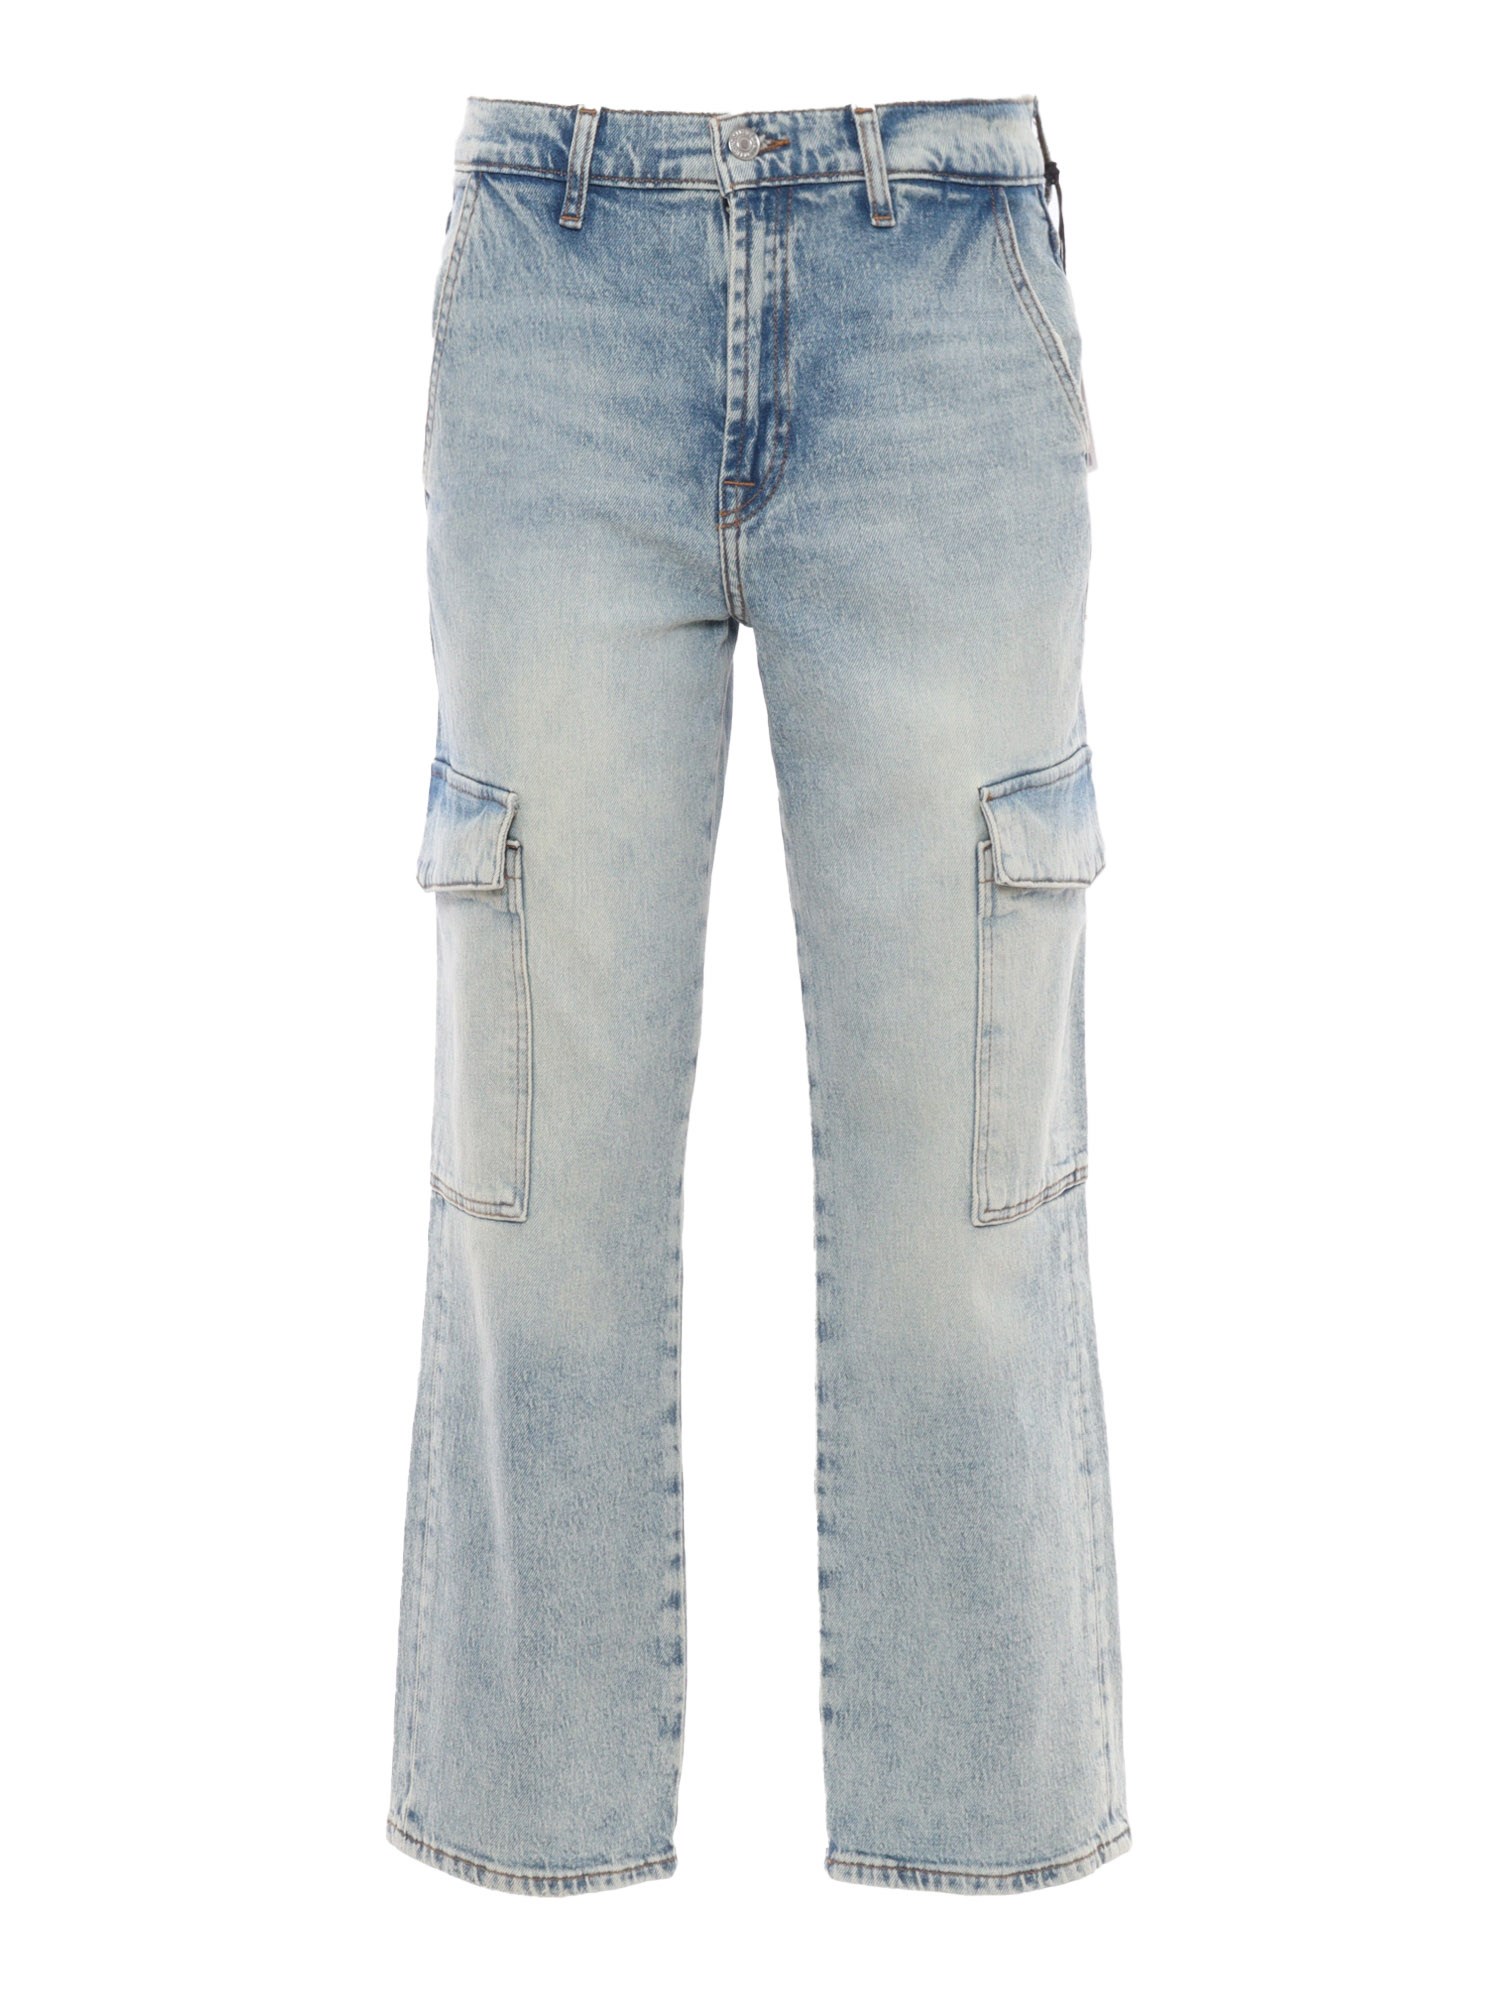 7 For All Mankind Denim Cargo In Blue